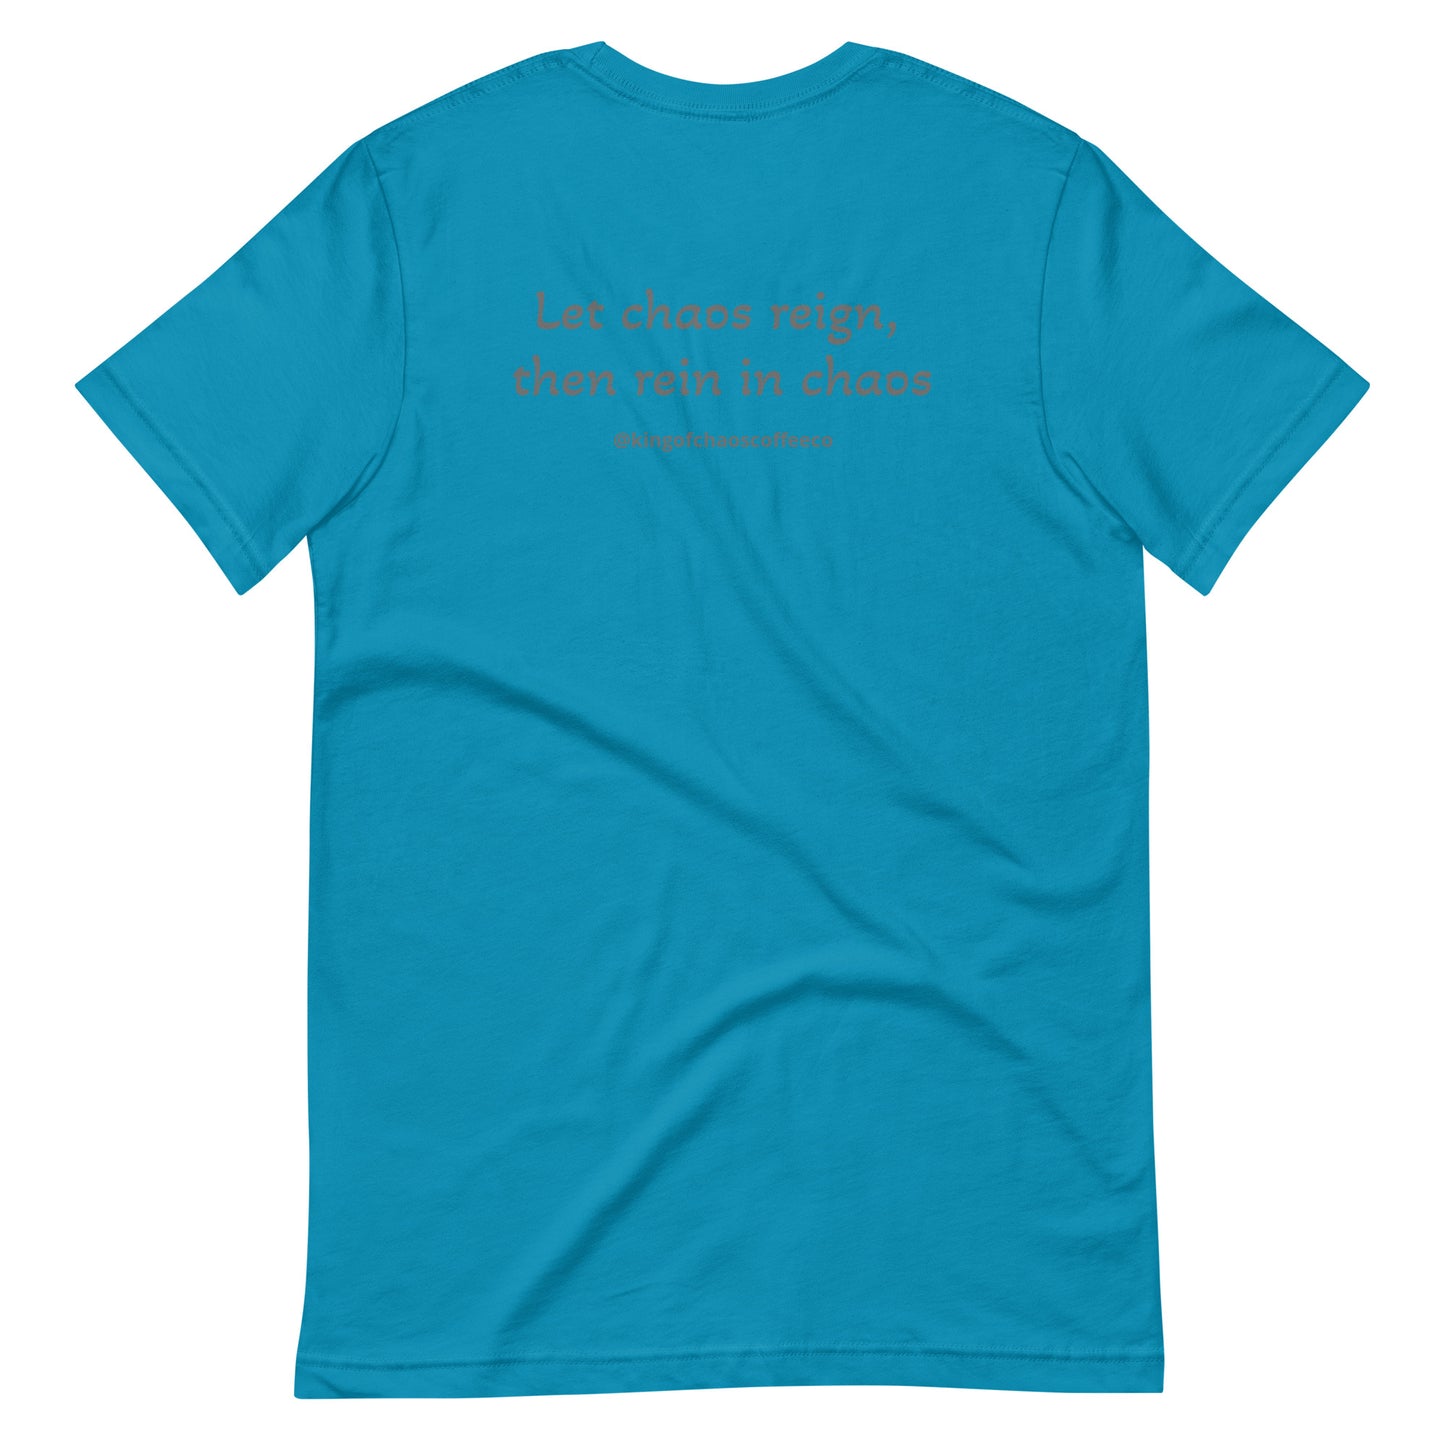 Logo artsy "let chaos reign, the rein in chaos" unisex t-shirt